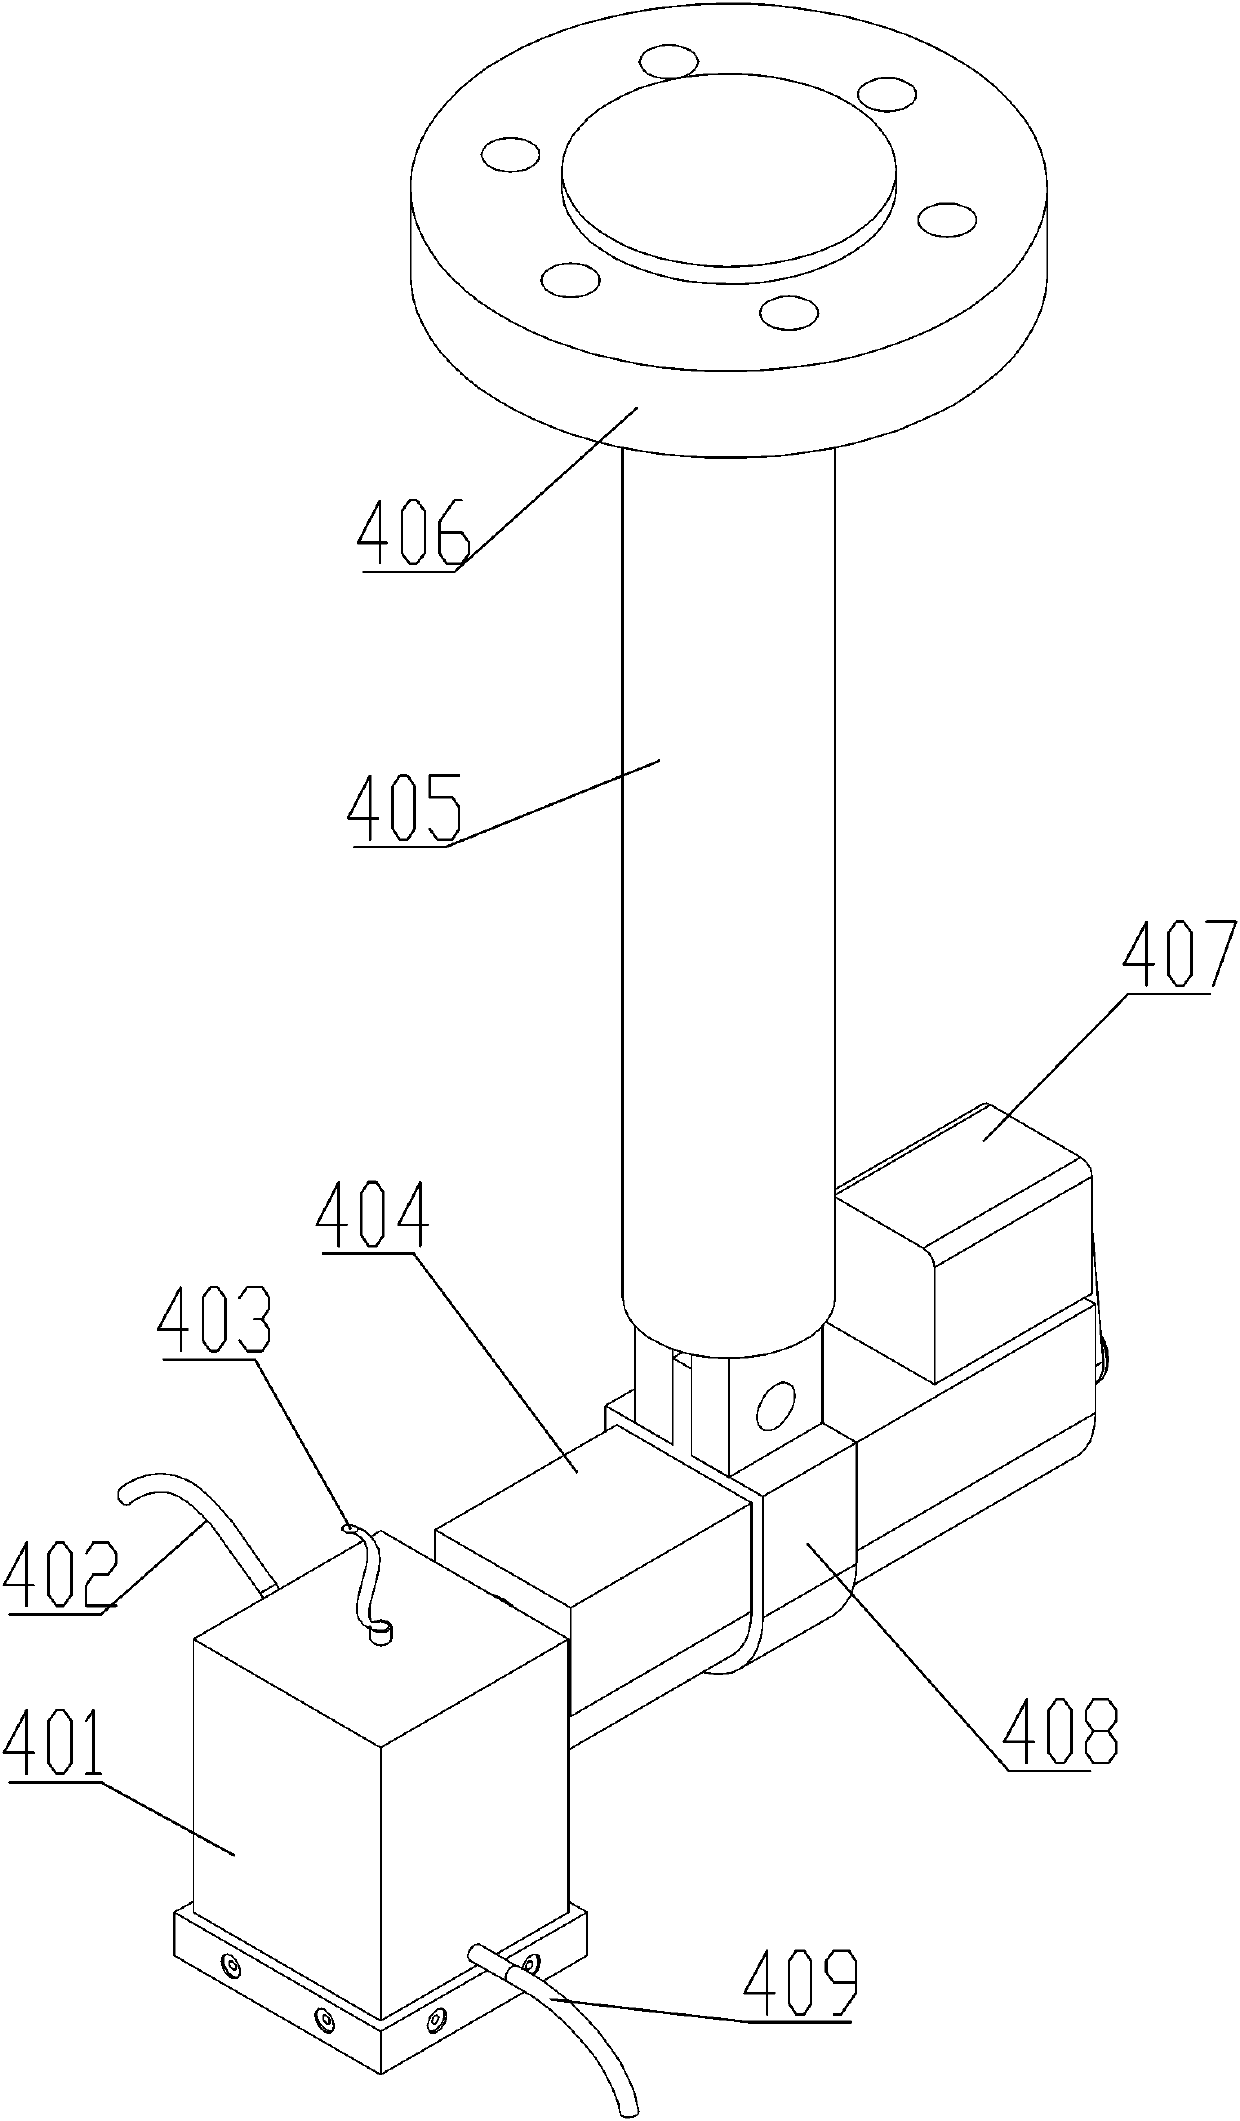 Spot welding ultrasonic B scanning automatic detection device and method